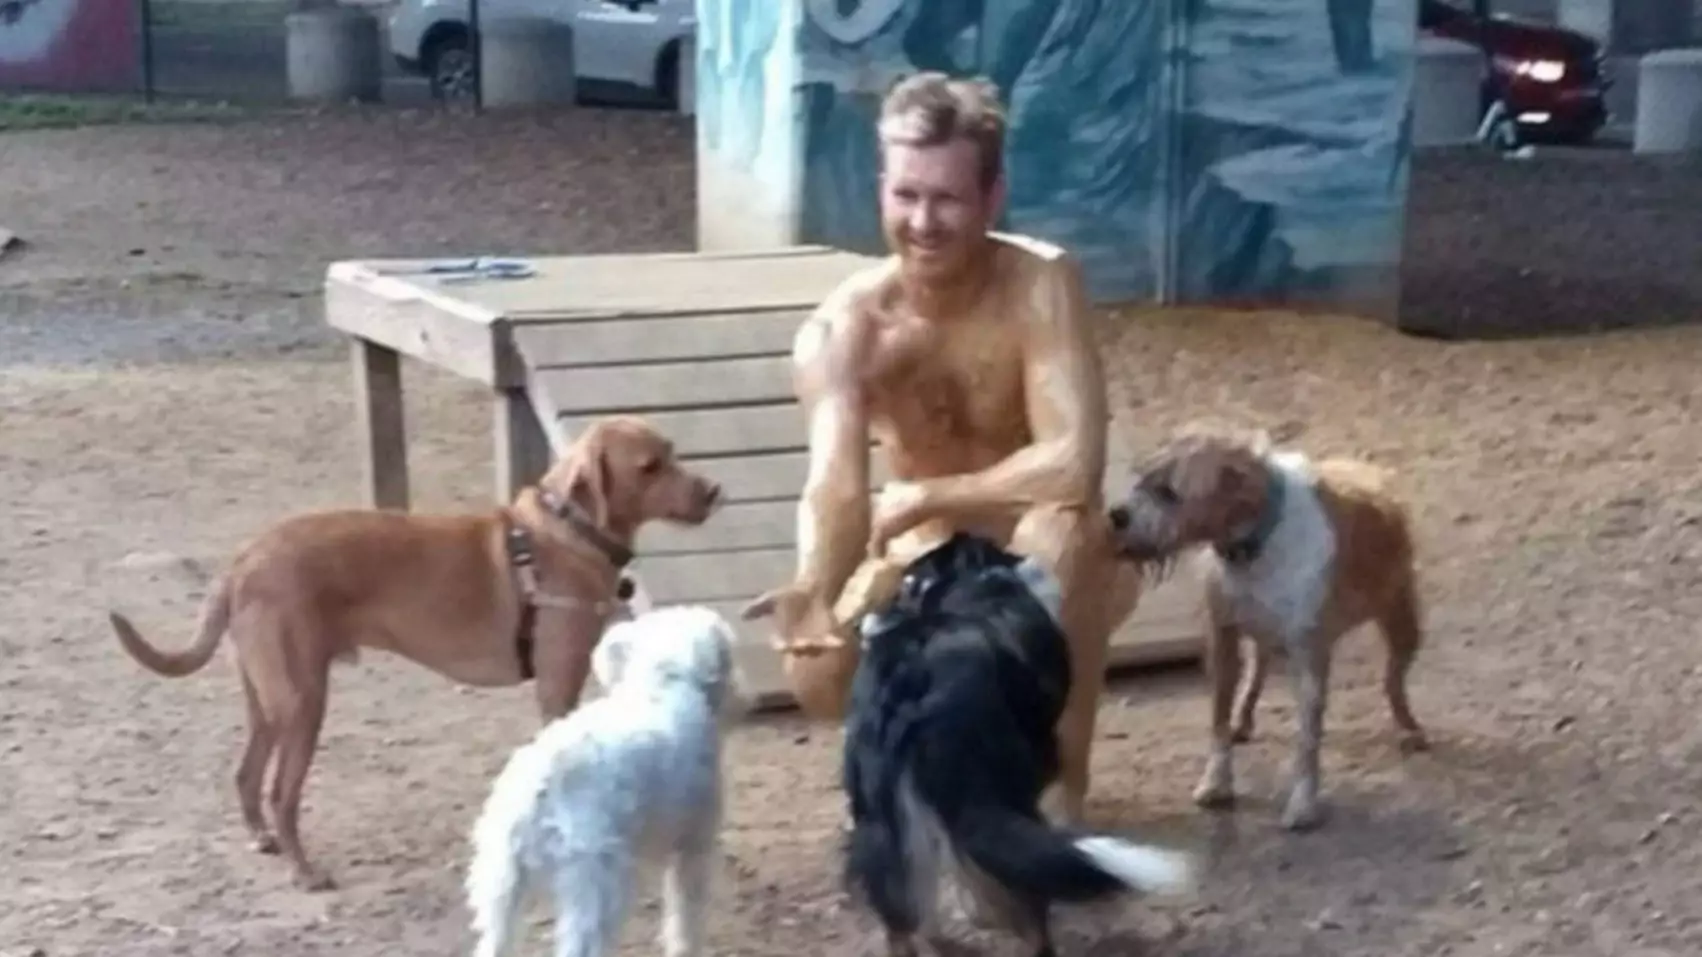 Man Who Finished Last In Fantasy Football Had To Cover Himself In Peanut Butter At Dog Park